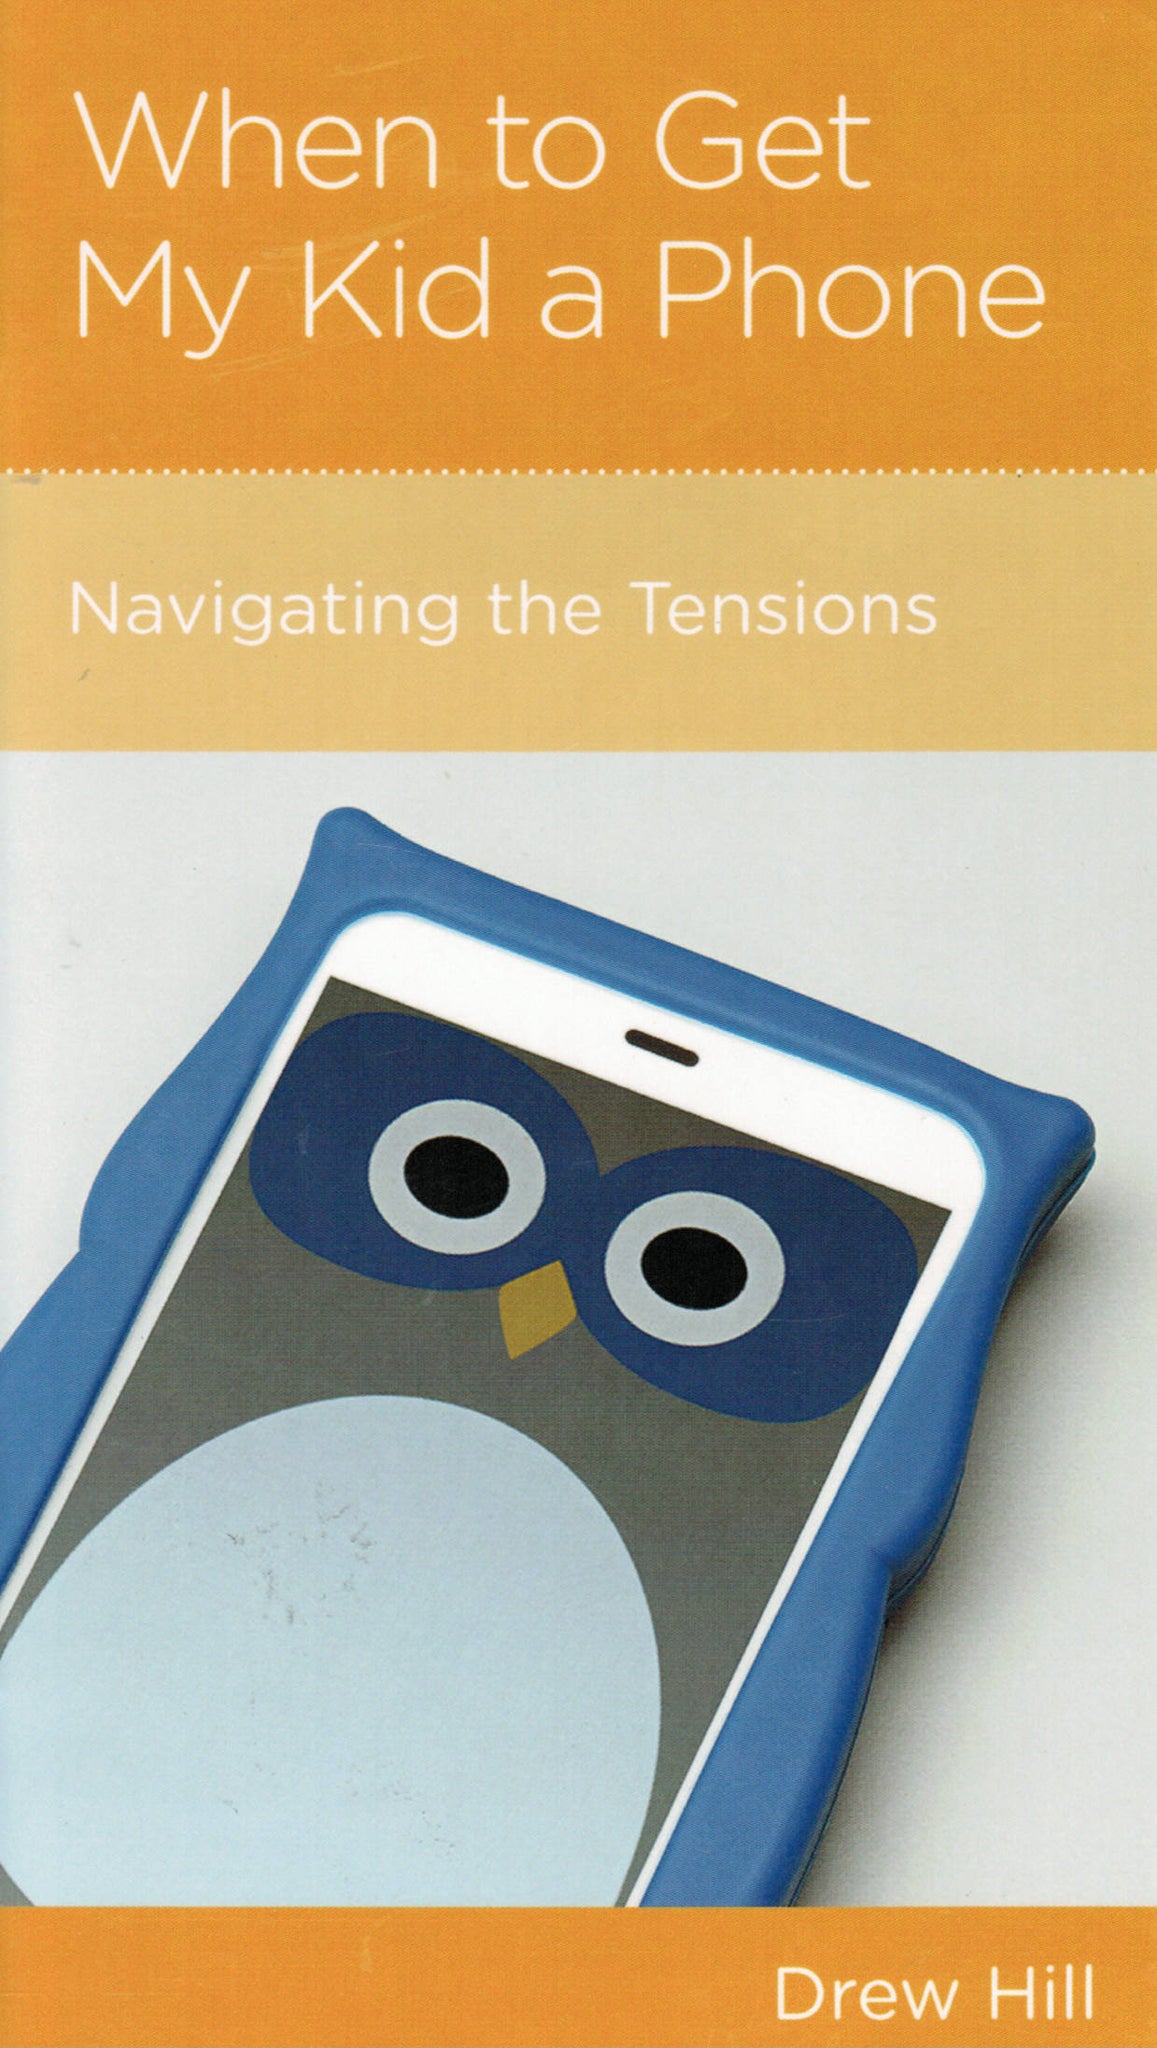 NewGrowth Minibooks - When to Get My Kid a Phone: Navigating the Tensions